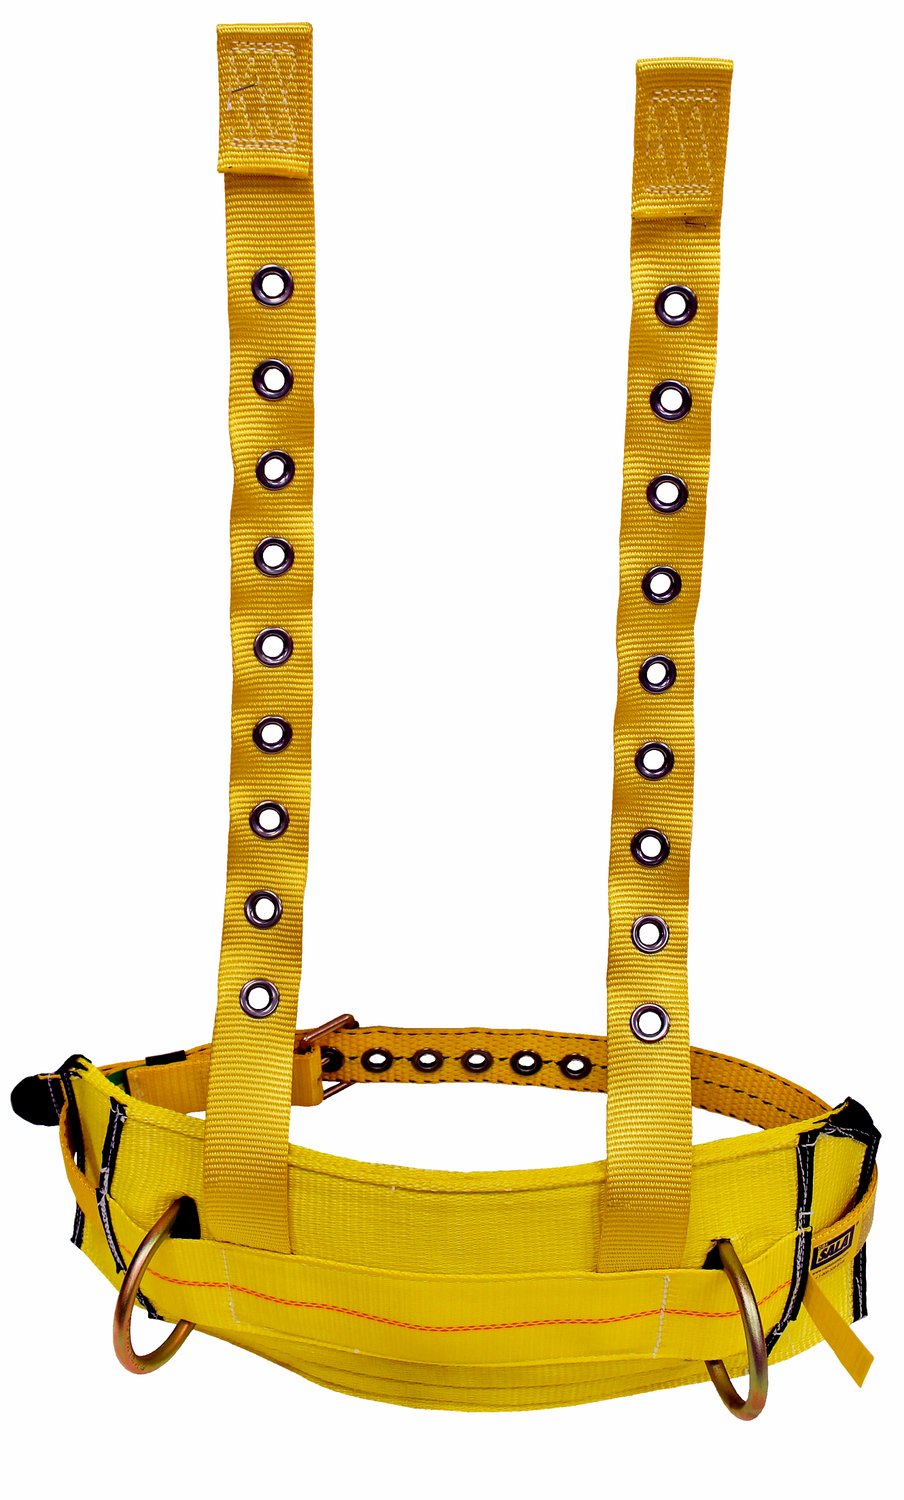 7012815131 - 3M DBI-SALA Derrick Tongue Buckle Positioning Belt with Tongue Buckle Harness Connector 1003221, Yellow, Large